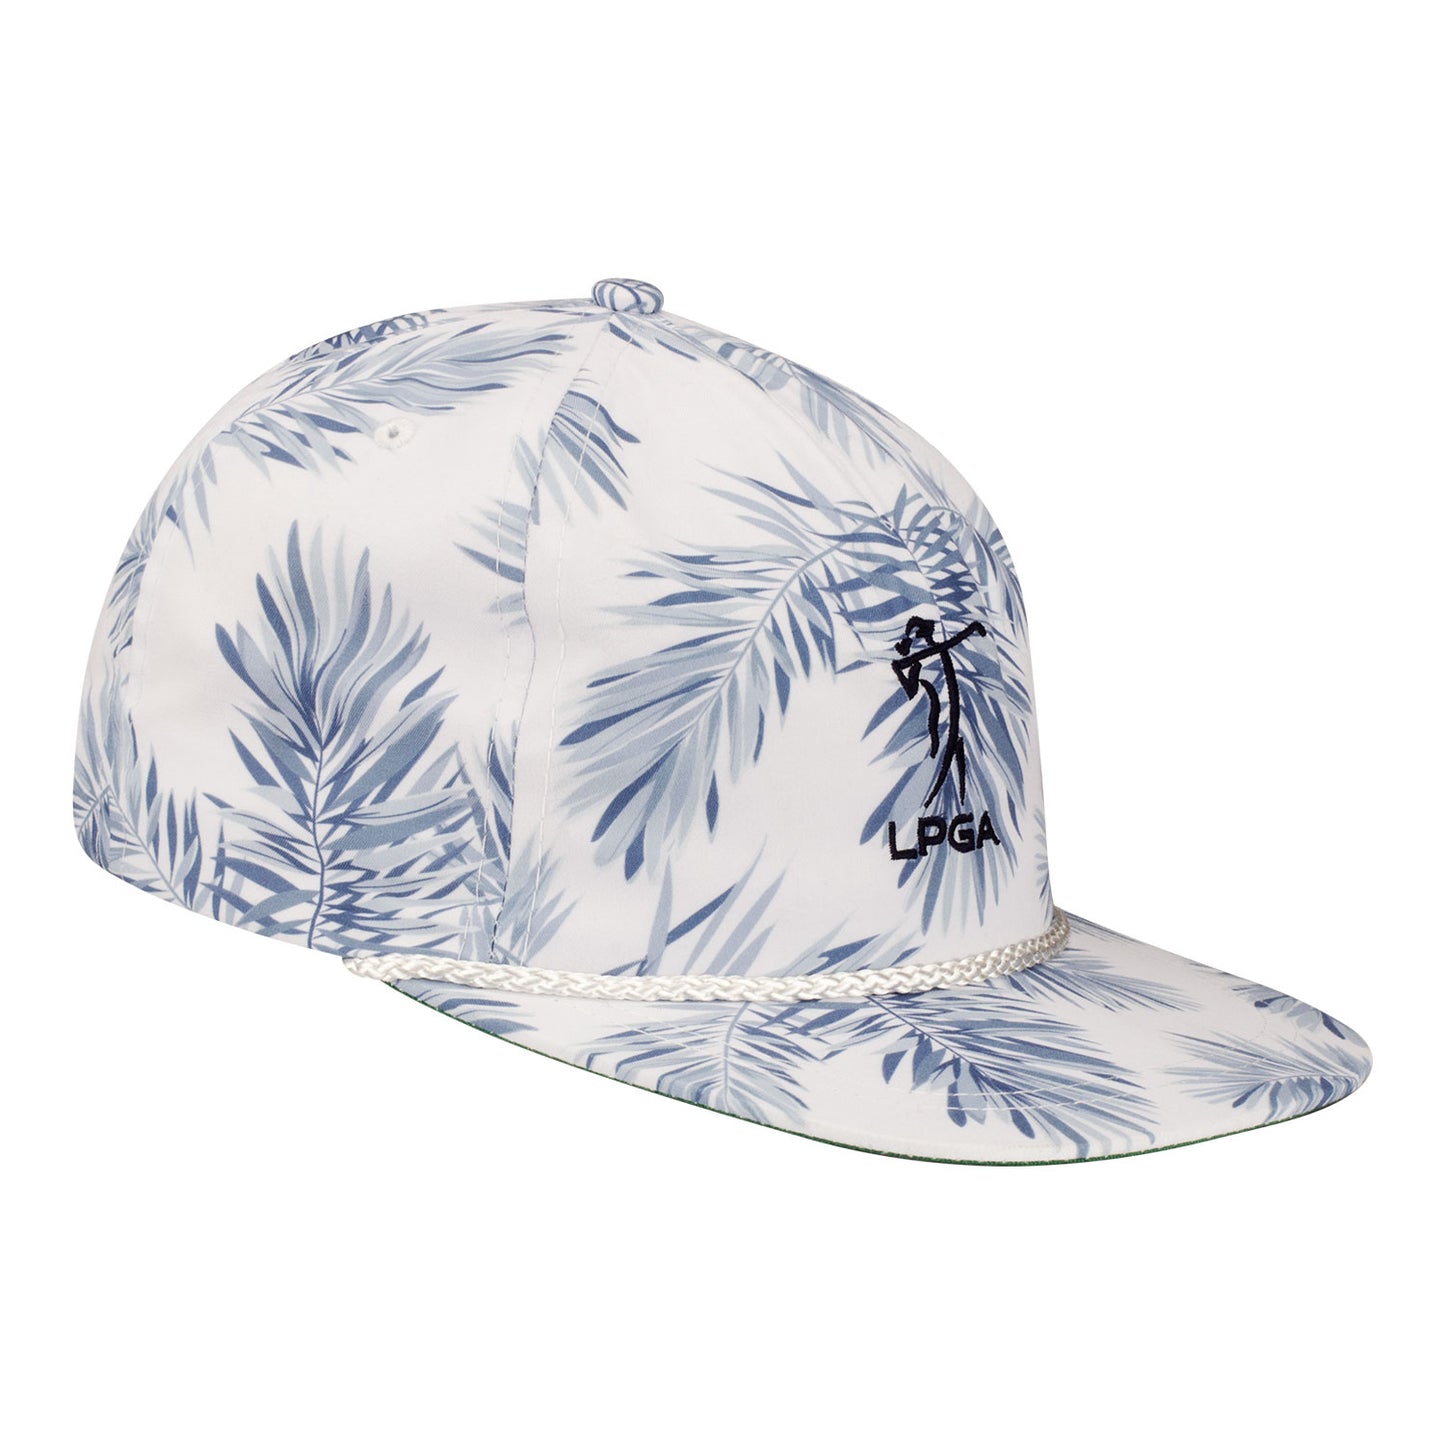 Imperial 2023 LPGA 5-Panel Hat in White and Blue - Angled Right Side View